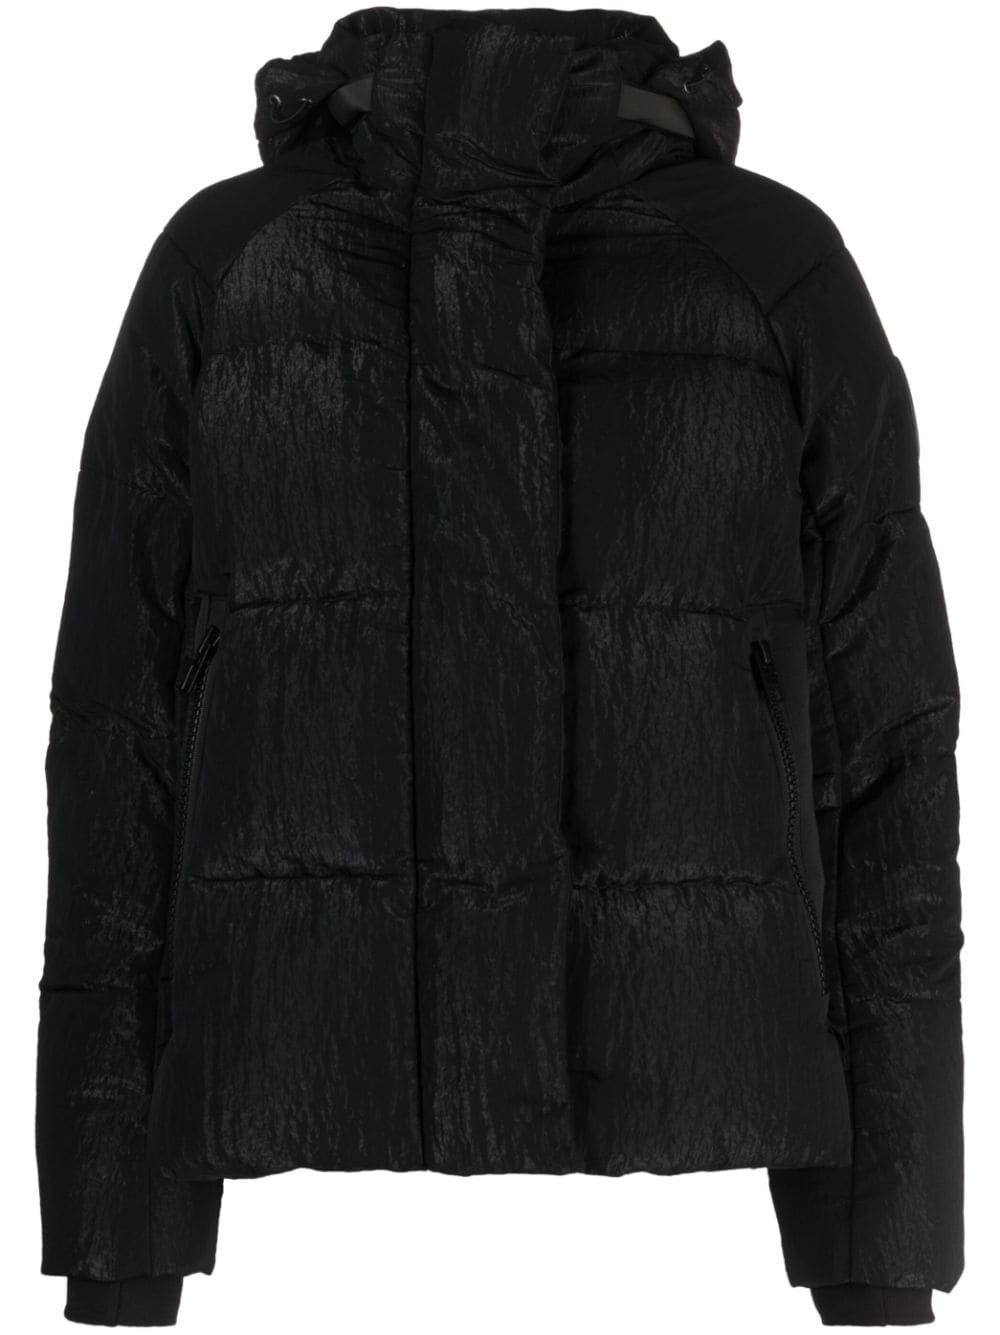 Canada Goose Junction hooded padded jacket - Black von Canada Goose